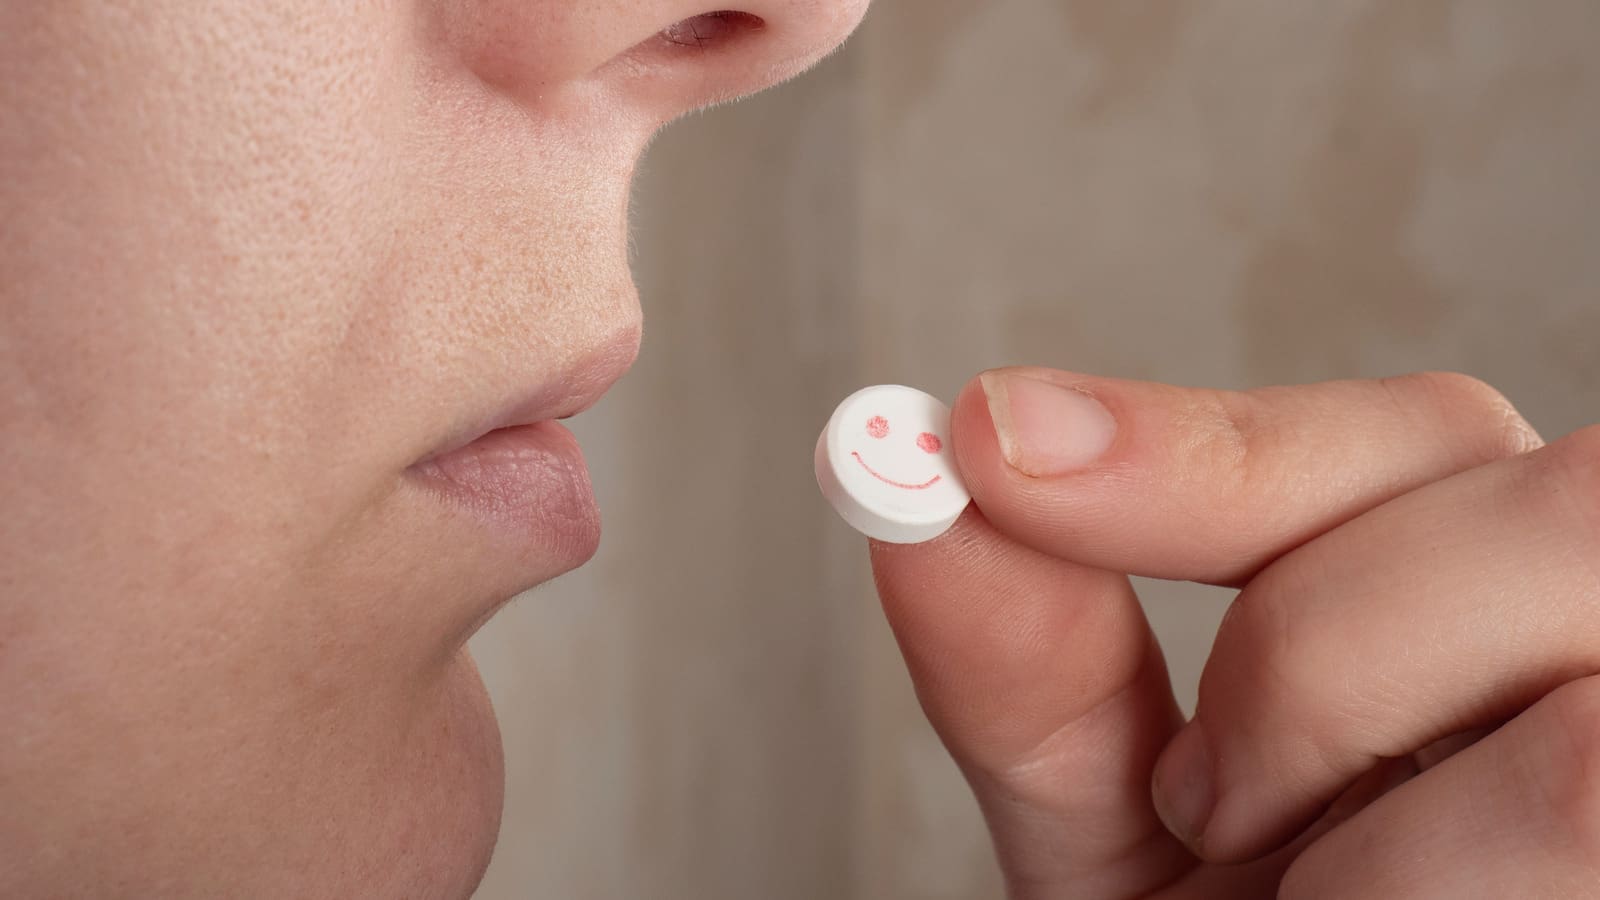 What does ecstasy do and how does it feel?